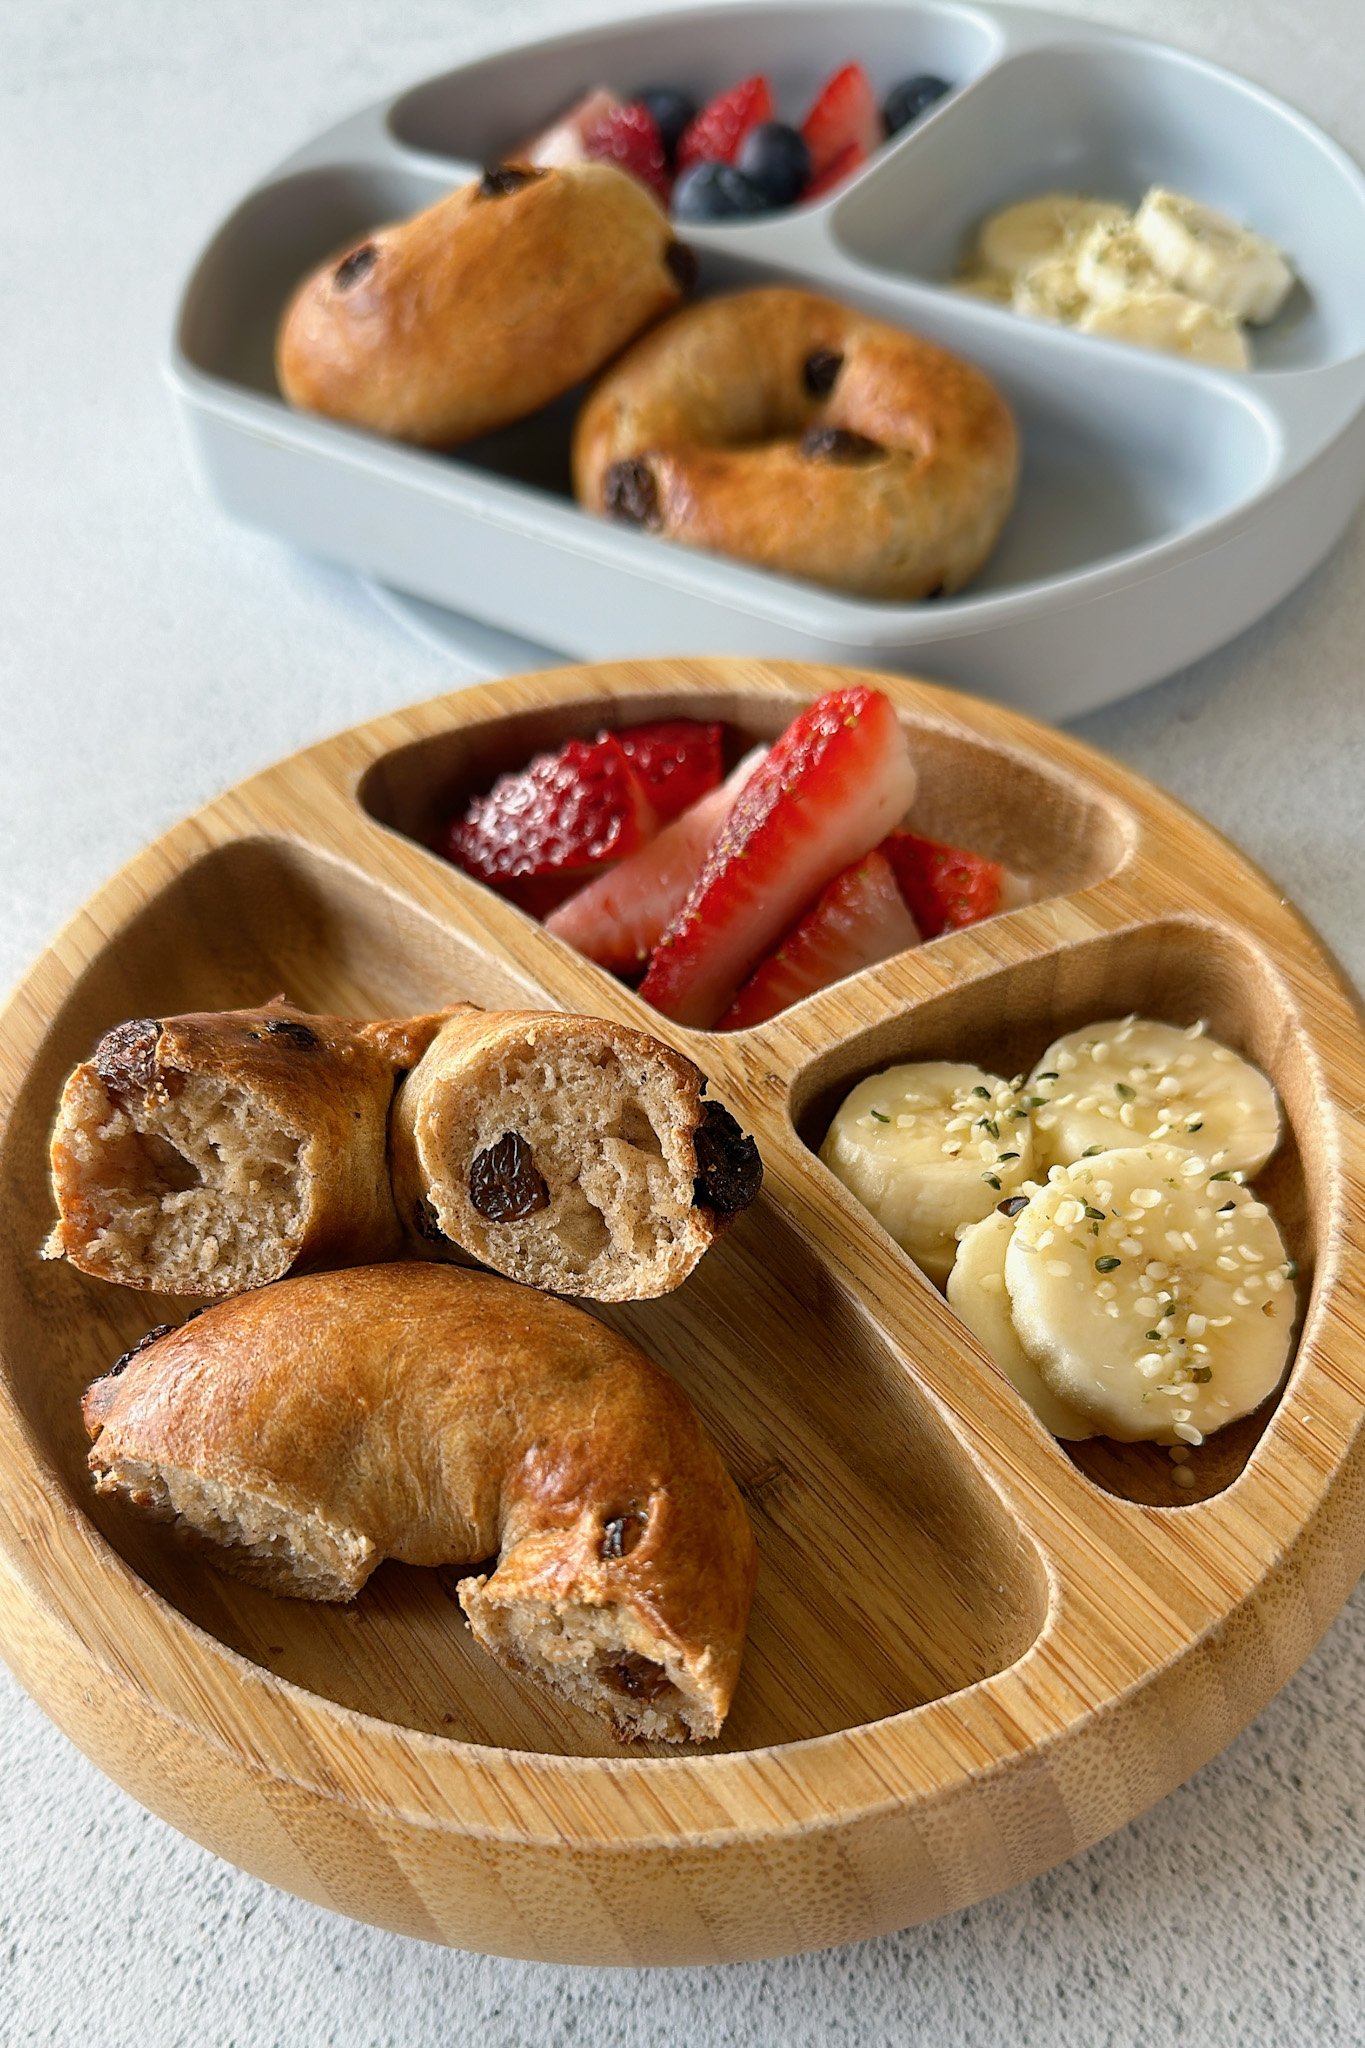 Cinnamon raisin bagels served with strawberries and bananas.